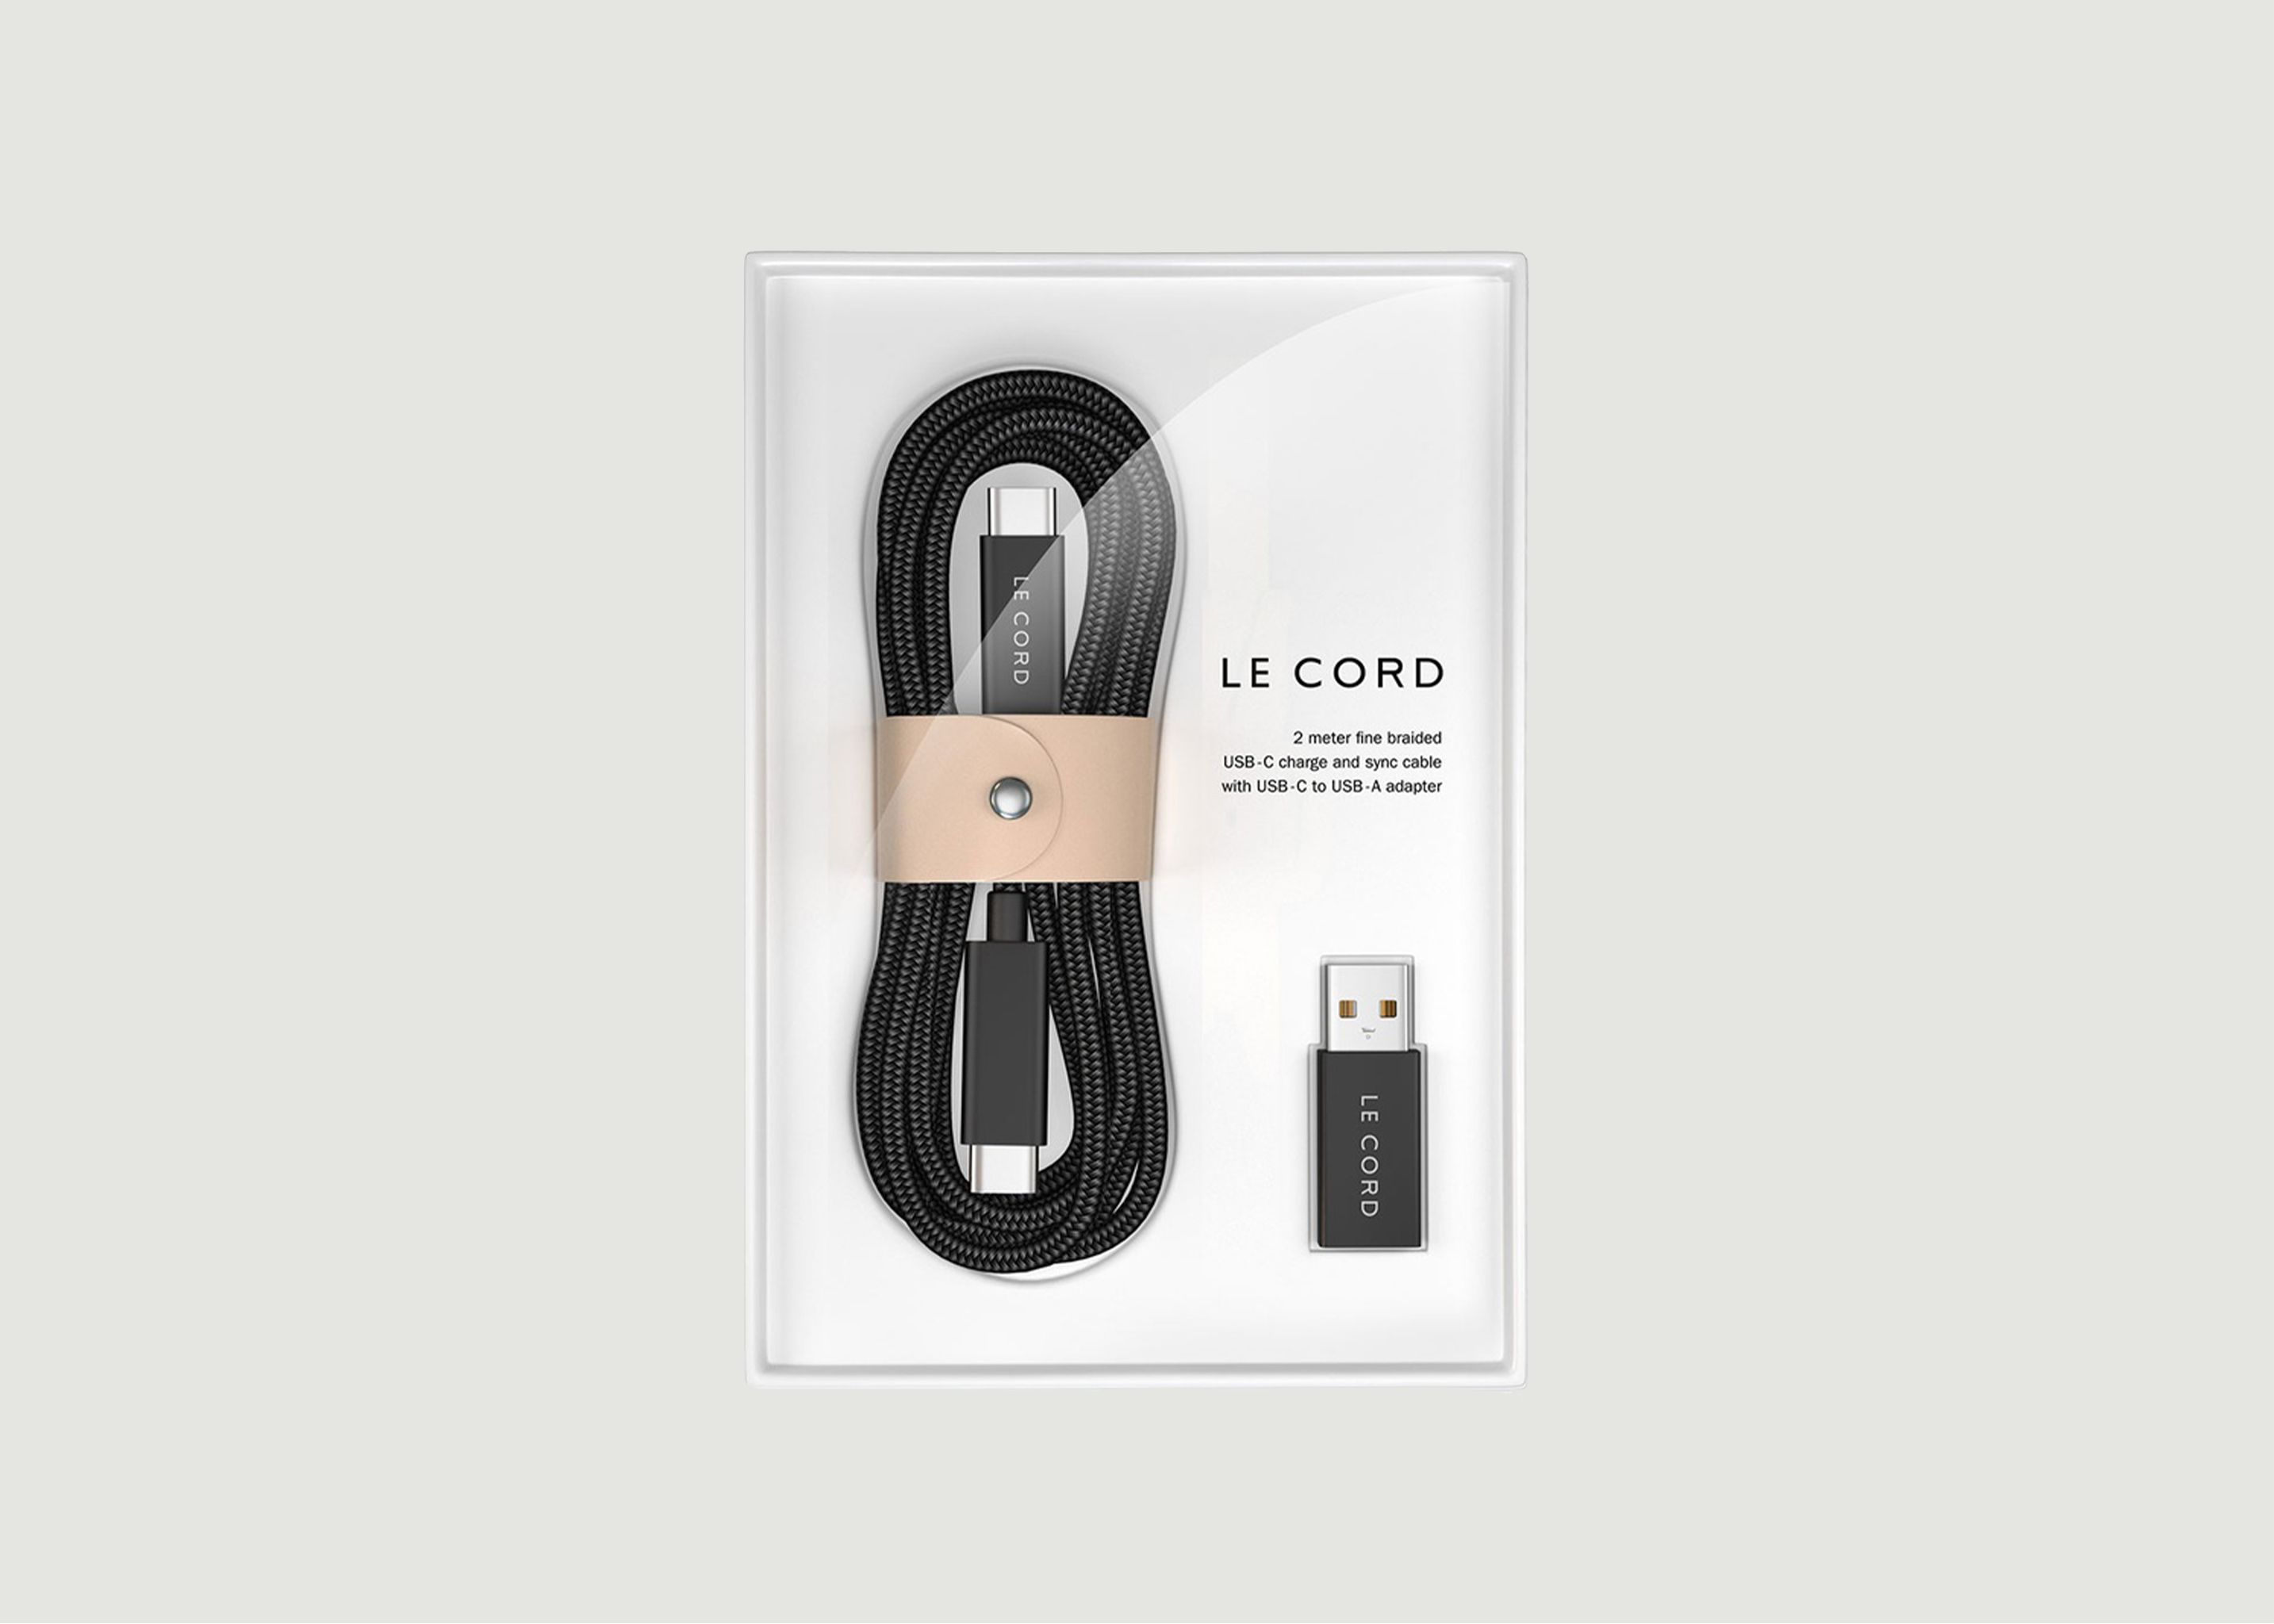 2 meter USB cable for iPhone made of recycled material - Le Cord